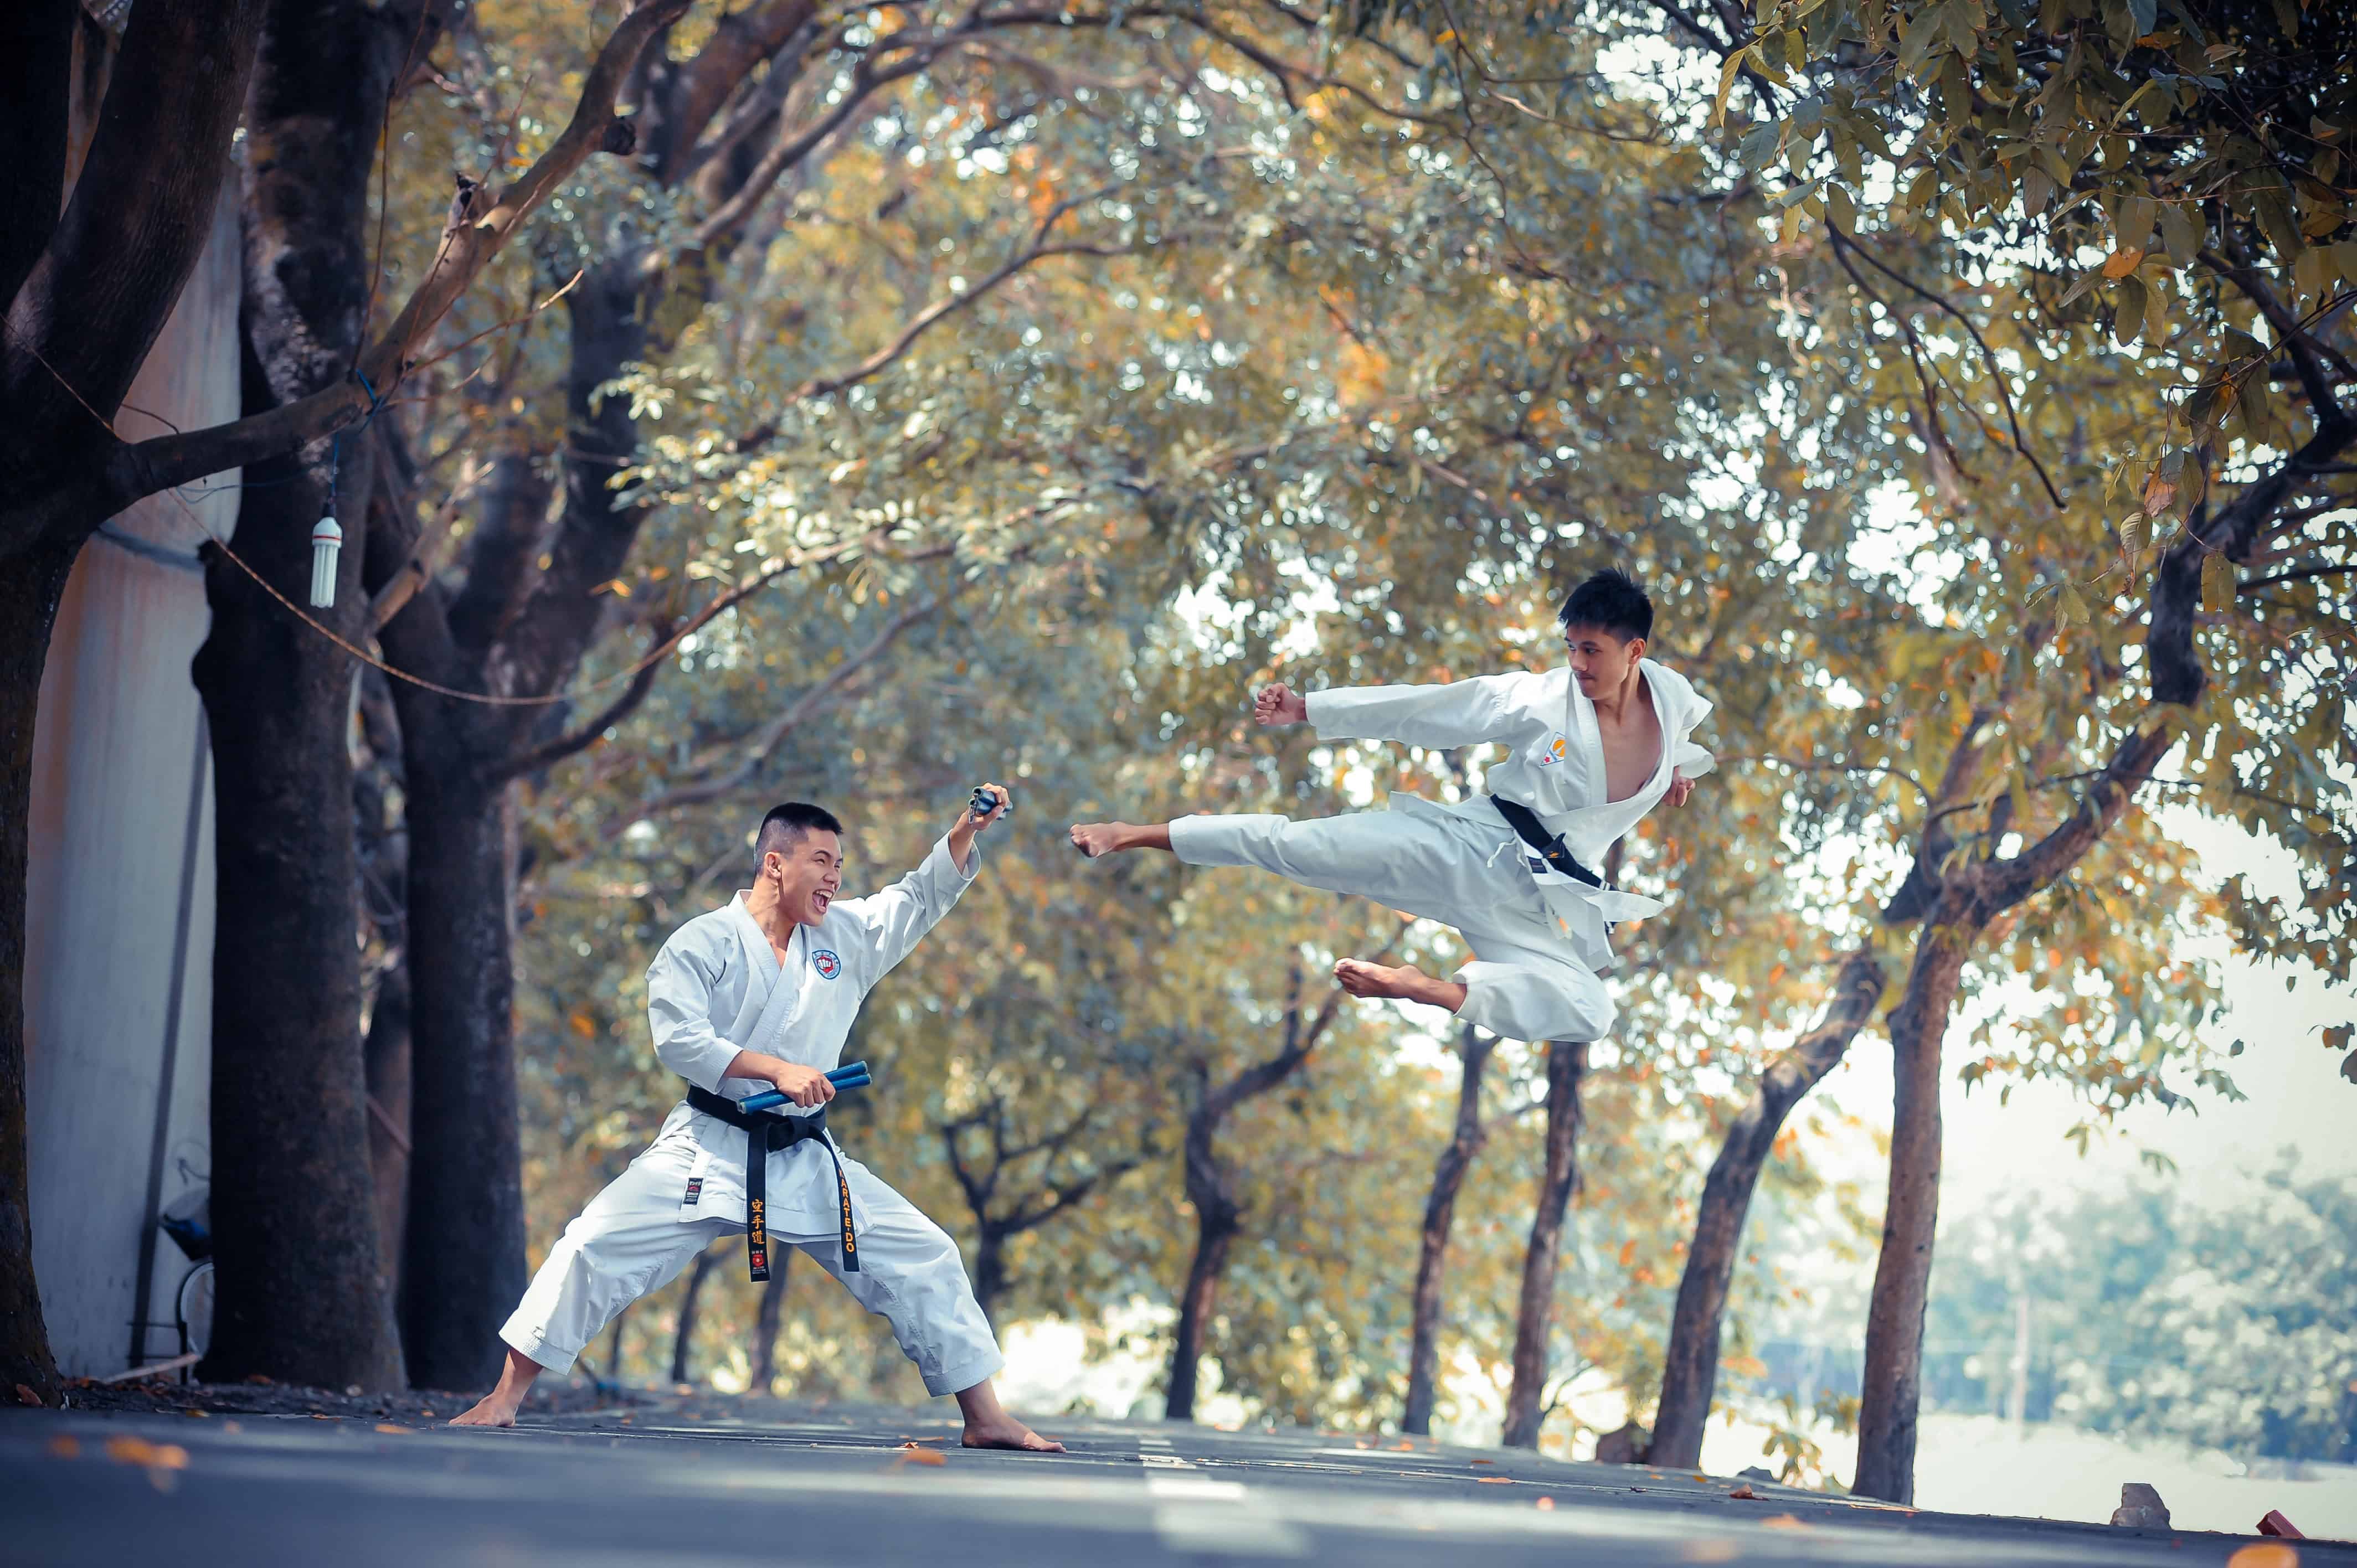 Two men in karate outfits fight